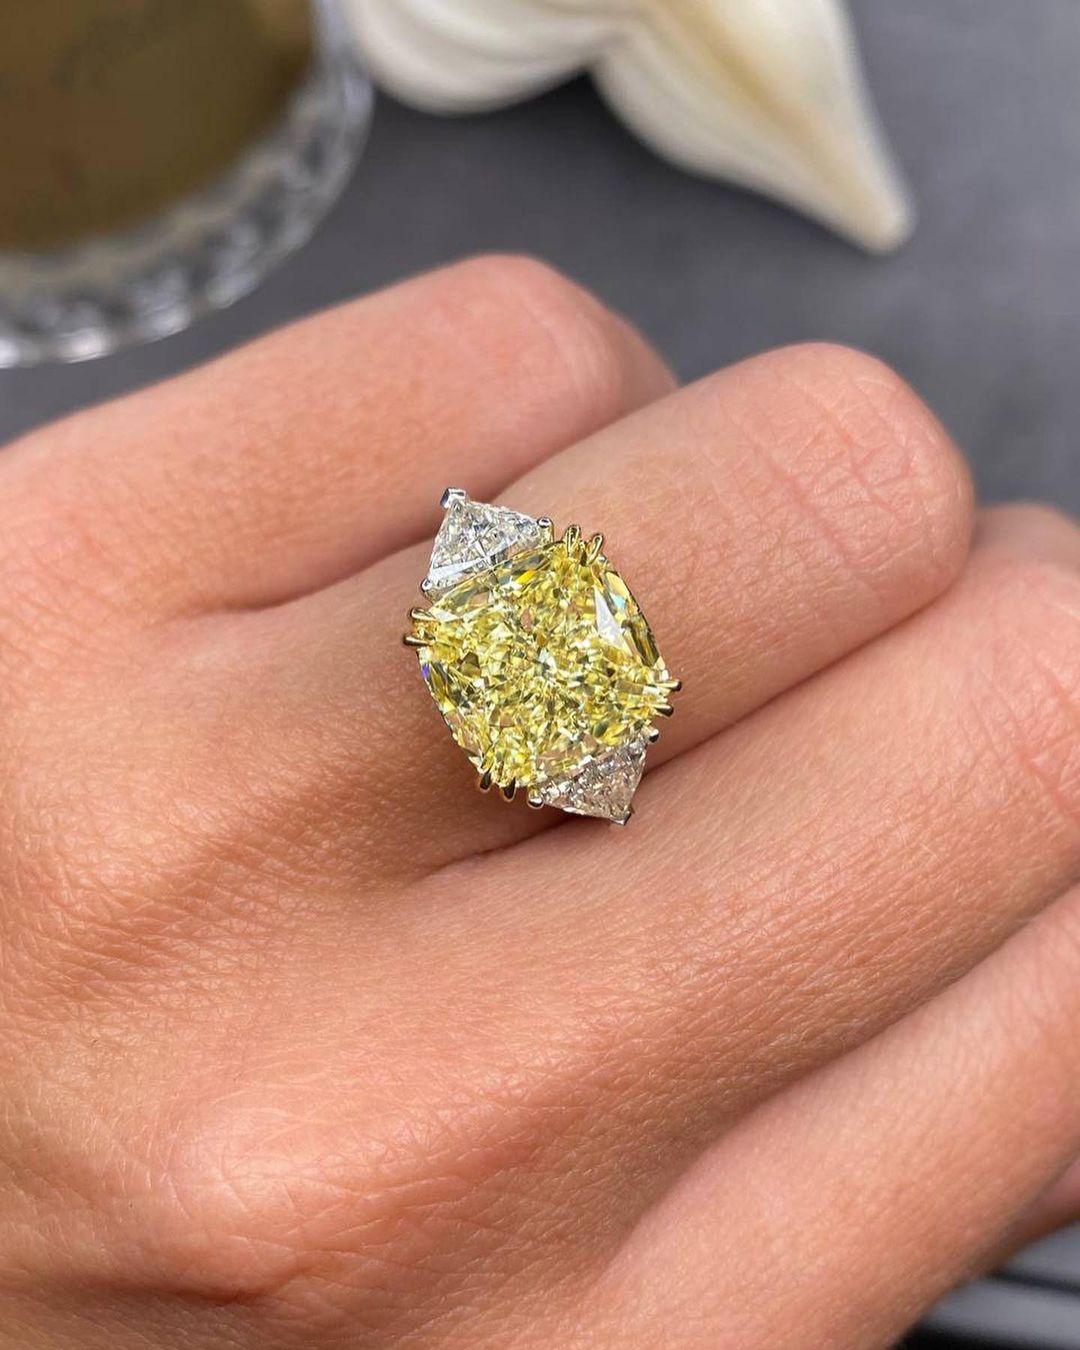 Cushion Cut Exceptional GIA Certified 5 Carat Fancy Intense Yellow Diamond Ring For Sale